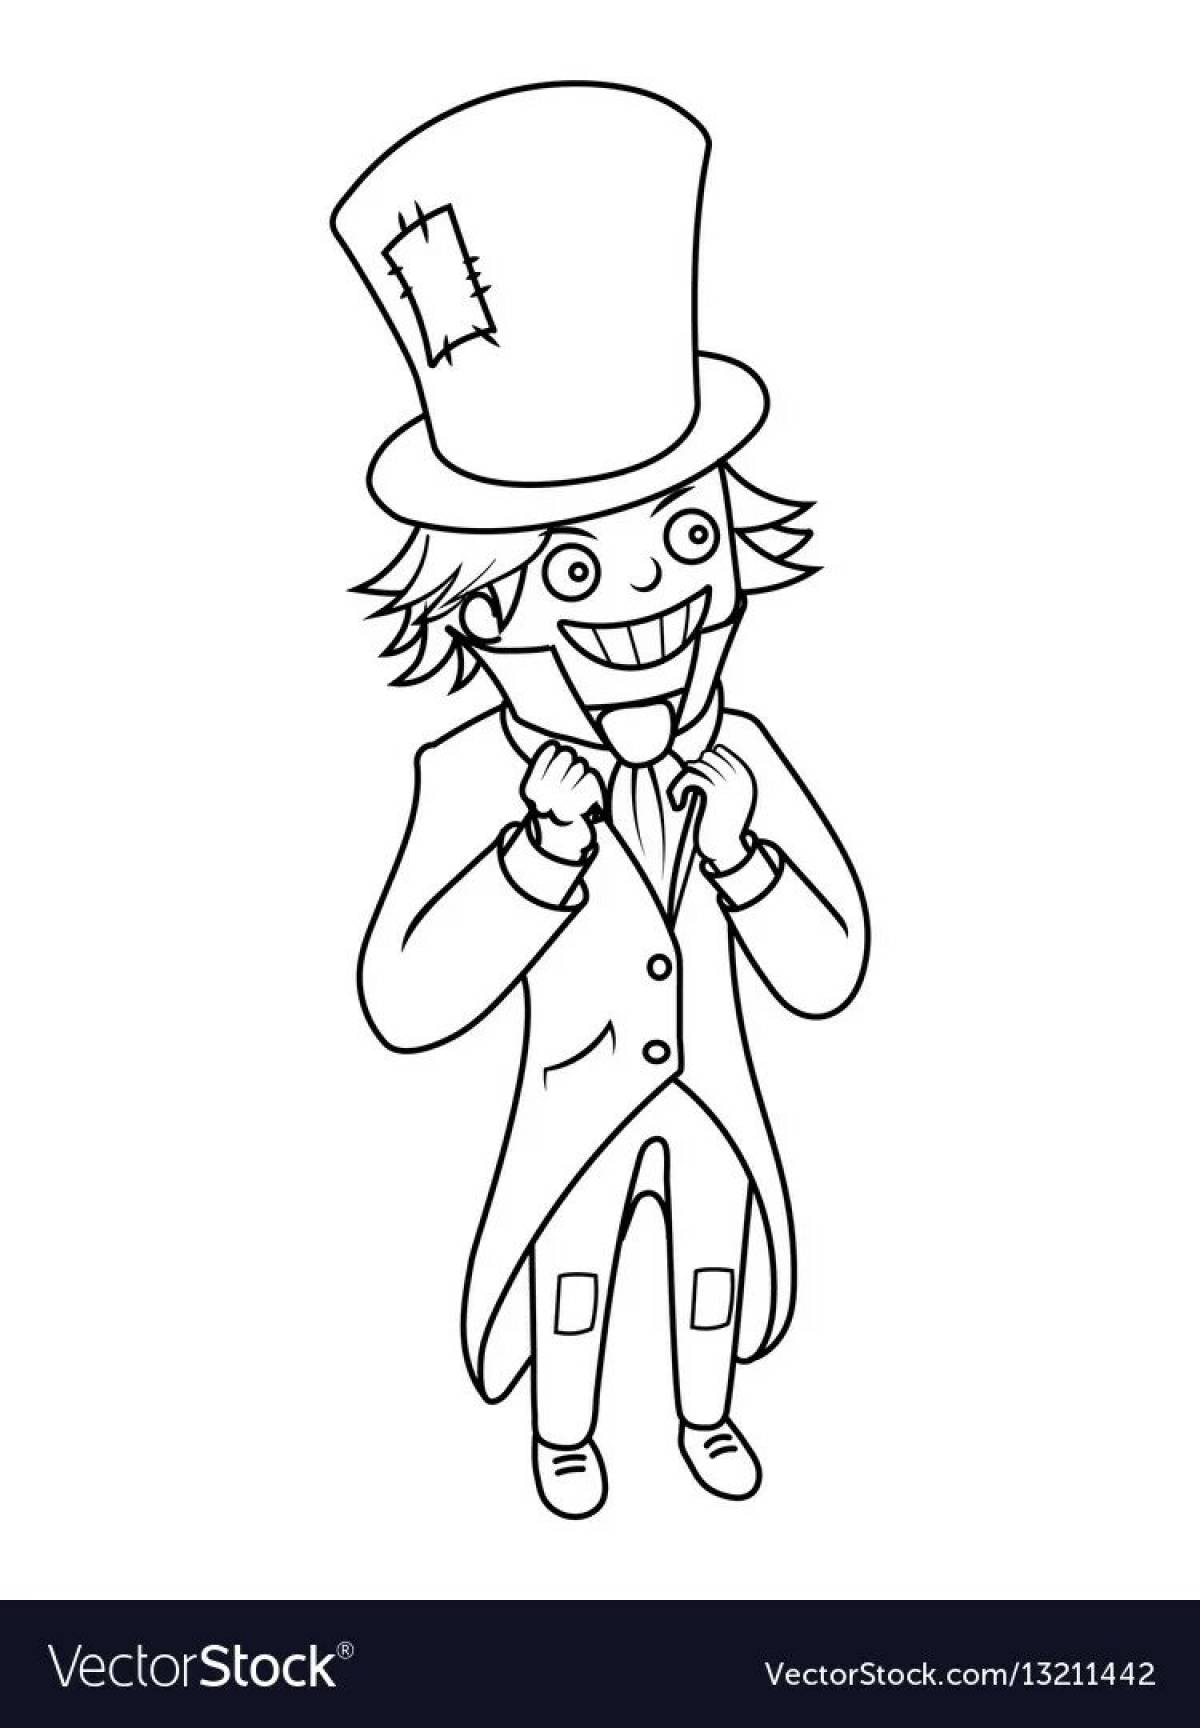 Coloring the living hatter